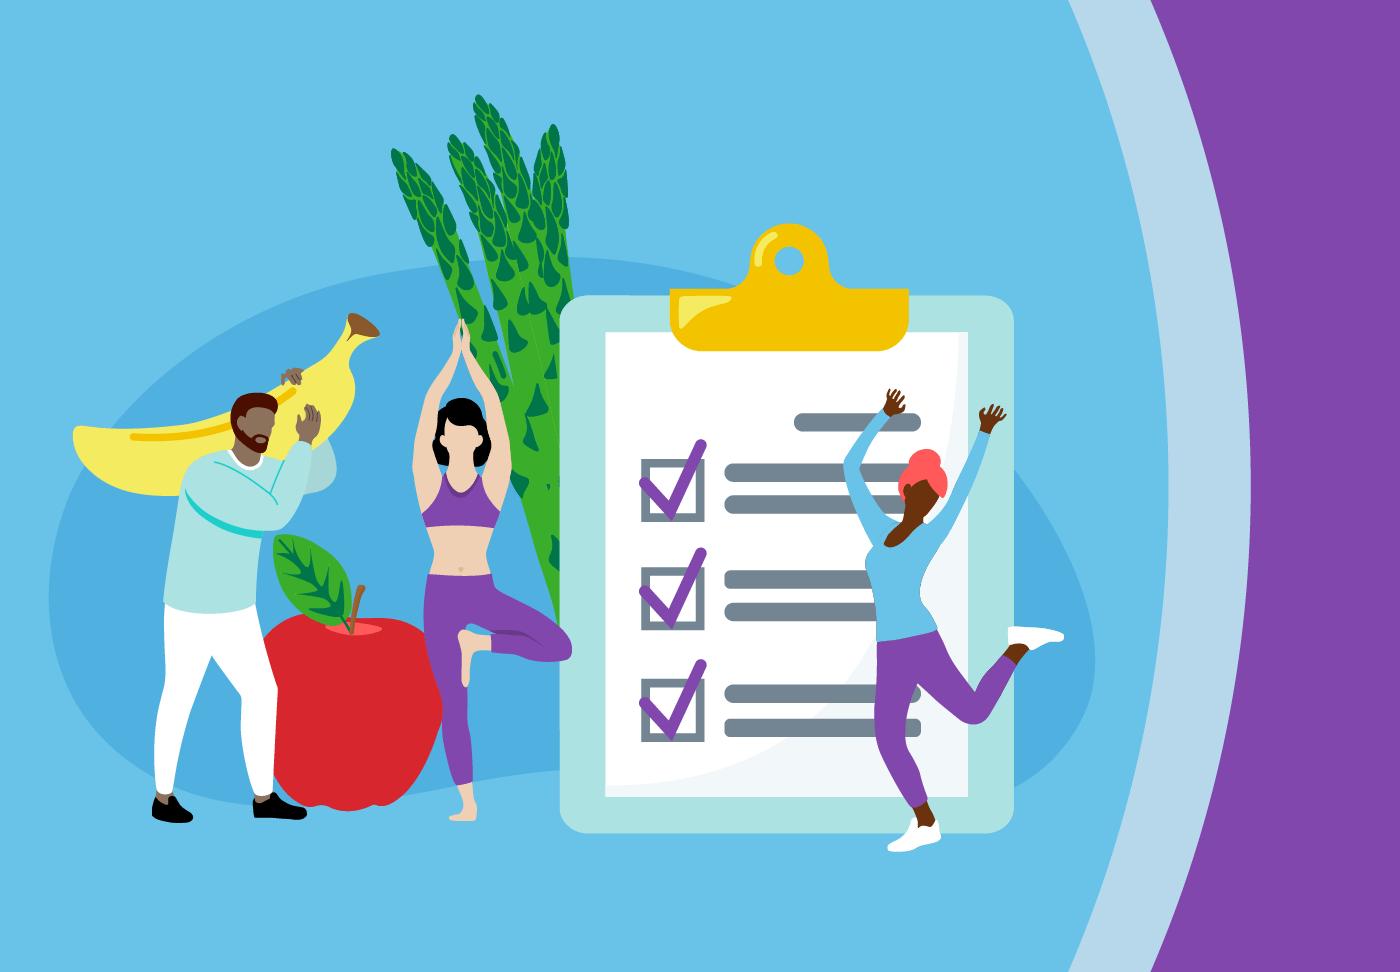 Illustration of fruits and vegetables, people exercising, checklist on clipboard